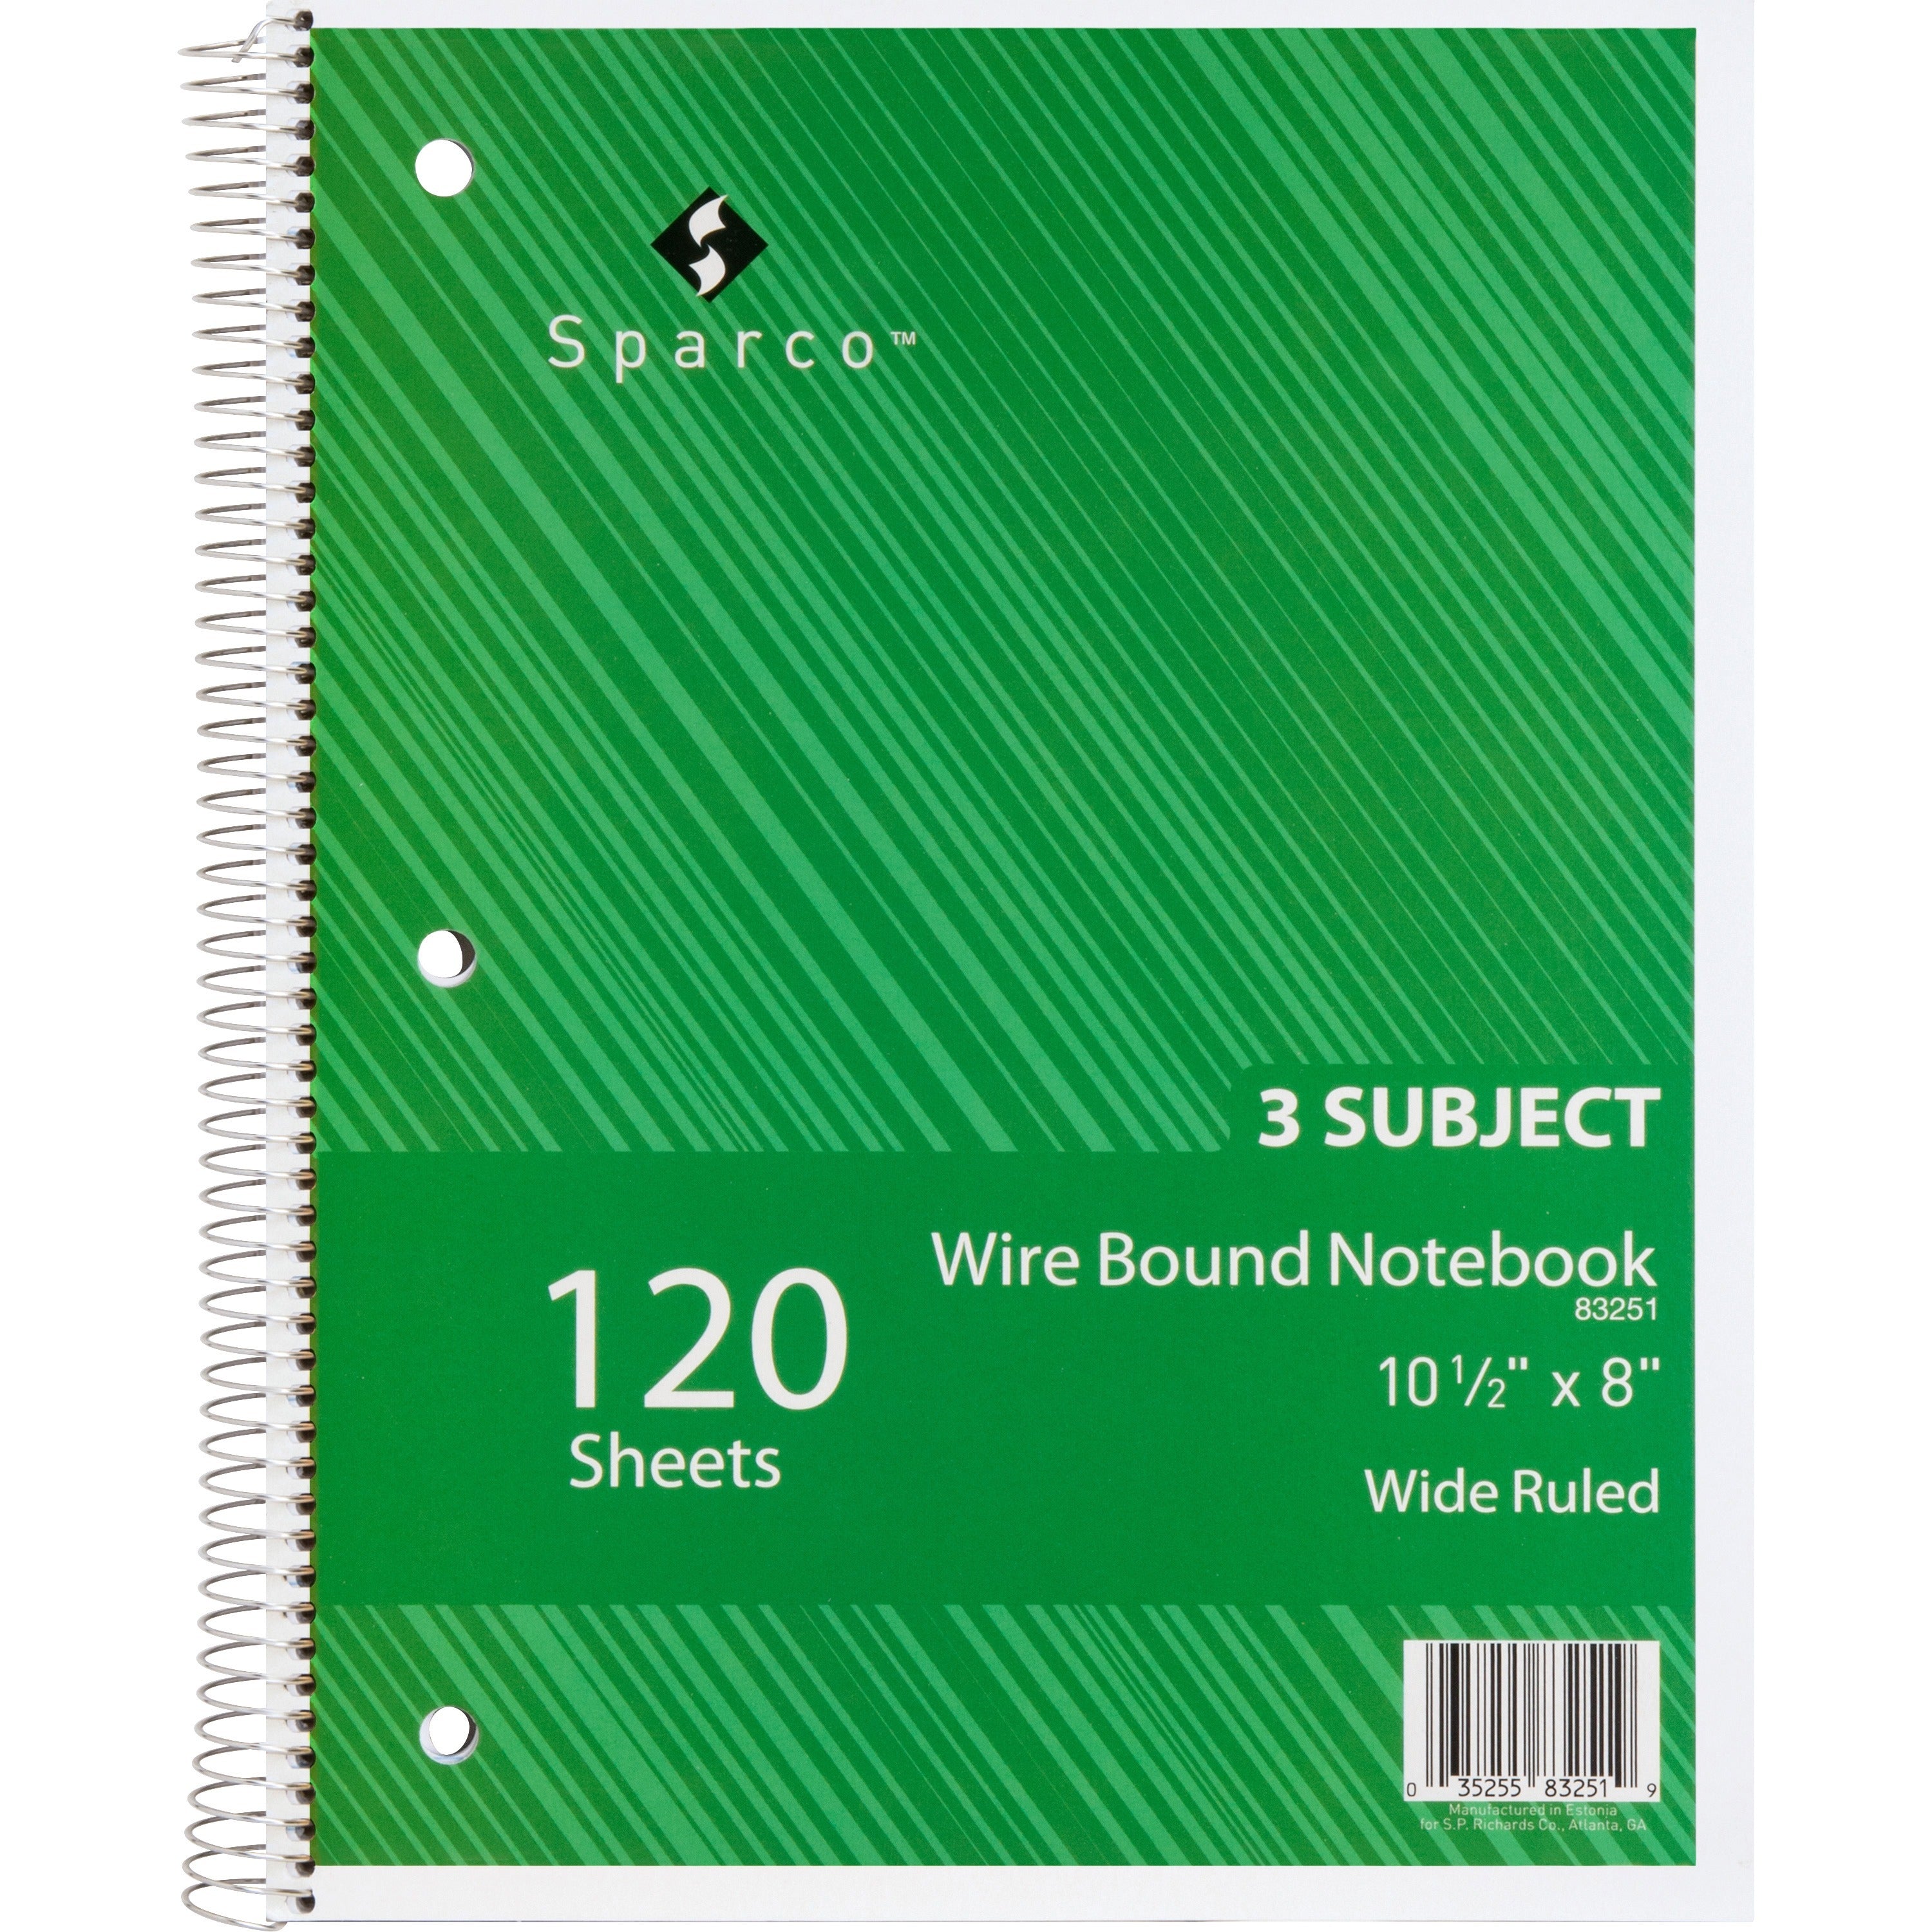 Sparco Quality 3HP Notebook - 3 Subject(s) - 120 Sheets - Wire Bound - Wide Ruled - Unruled Margin - 16 lb Basis Weight - 8" x 10 1/2" - Bright White Paper - AssortedChipboard Cover - Bleed Resistant, Stiff-cover - 1 Each - 